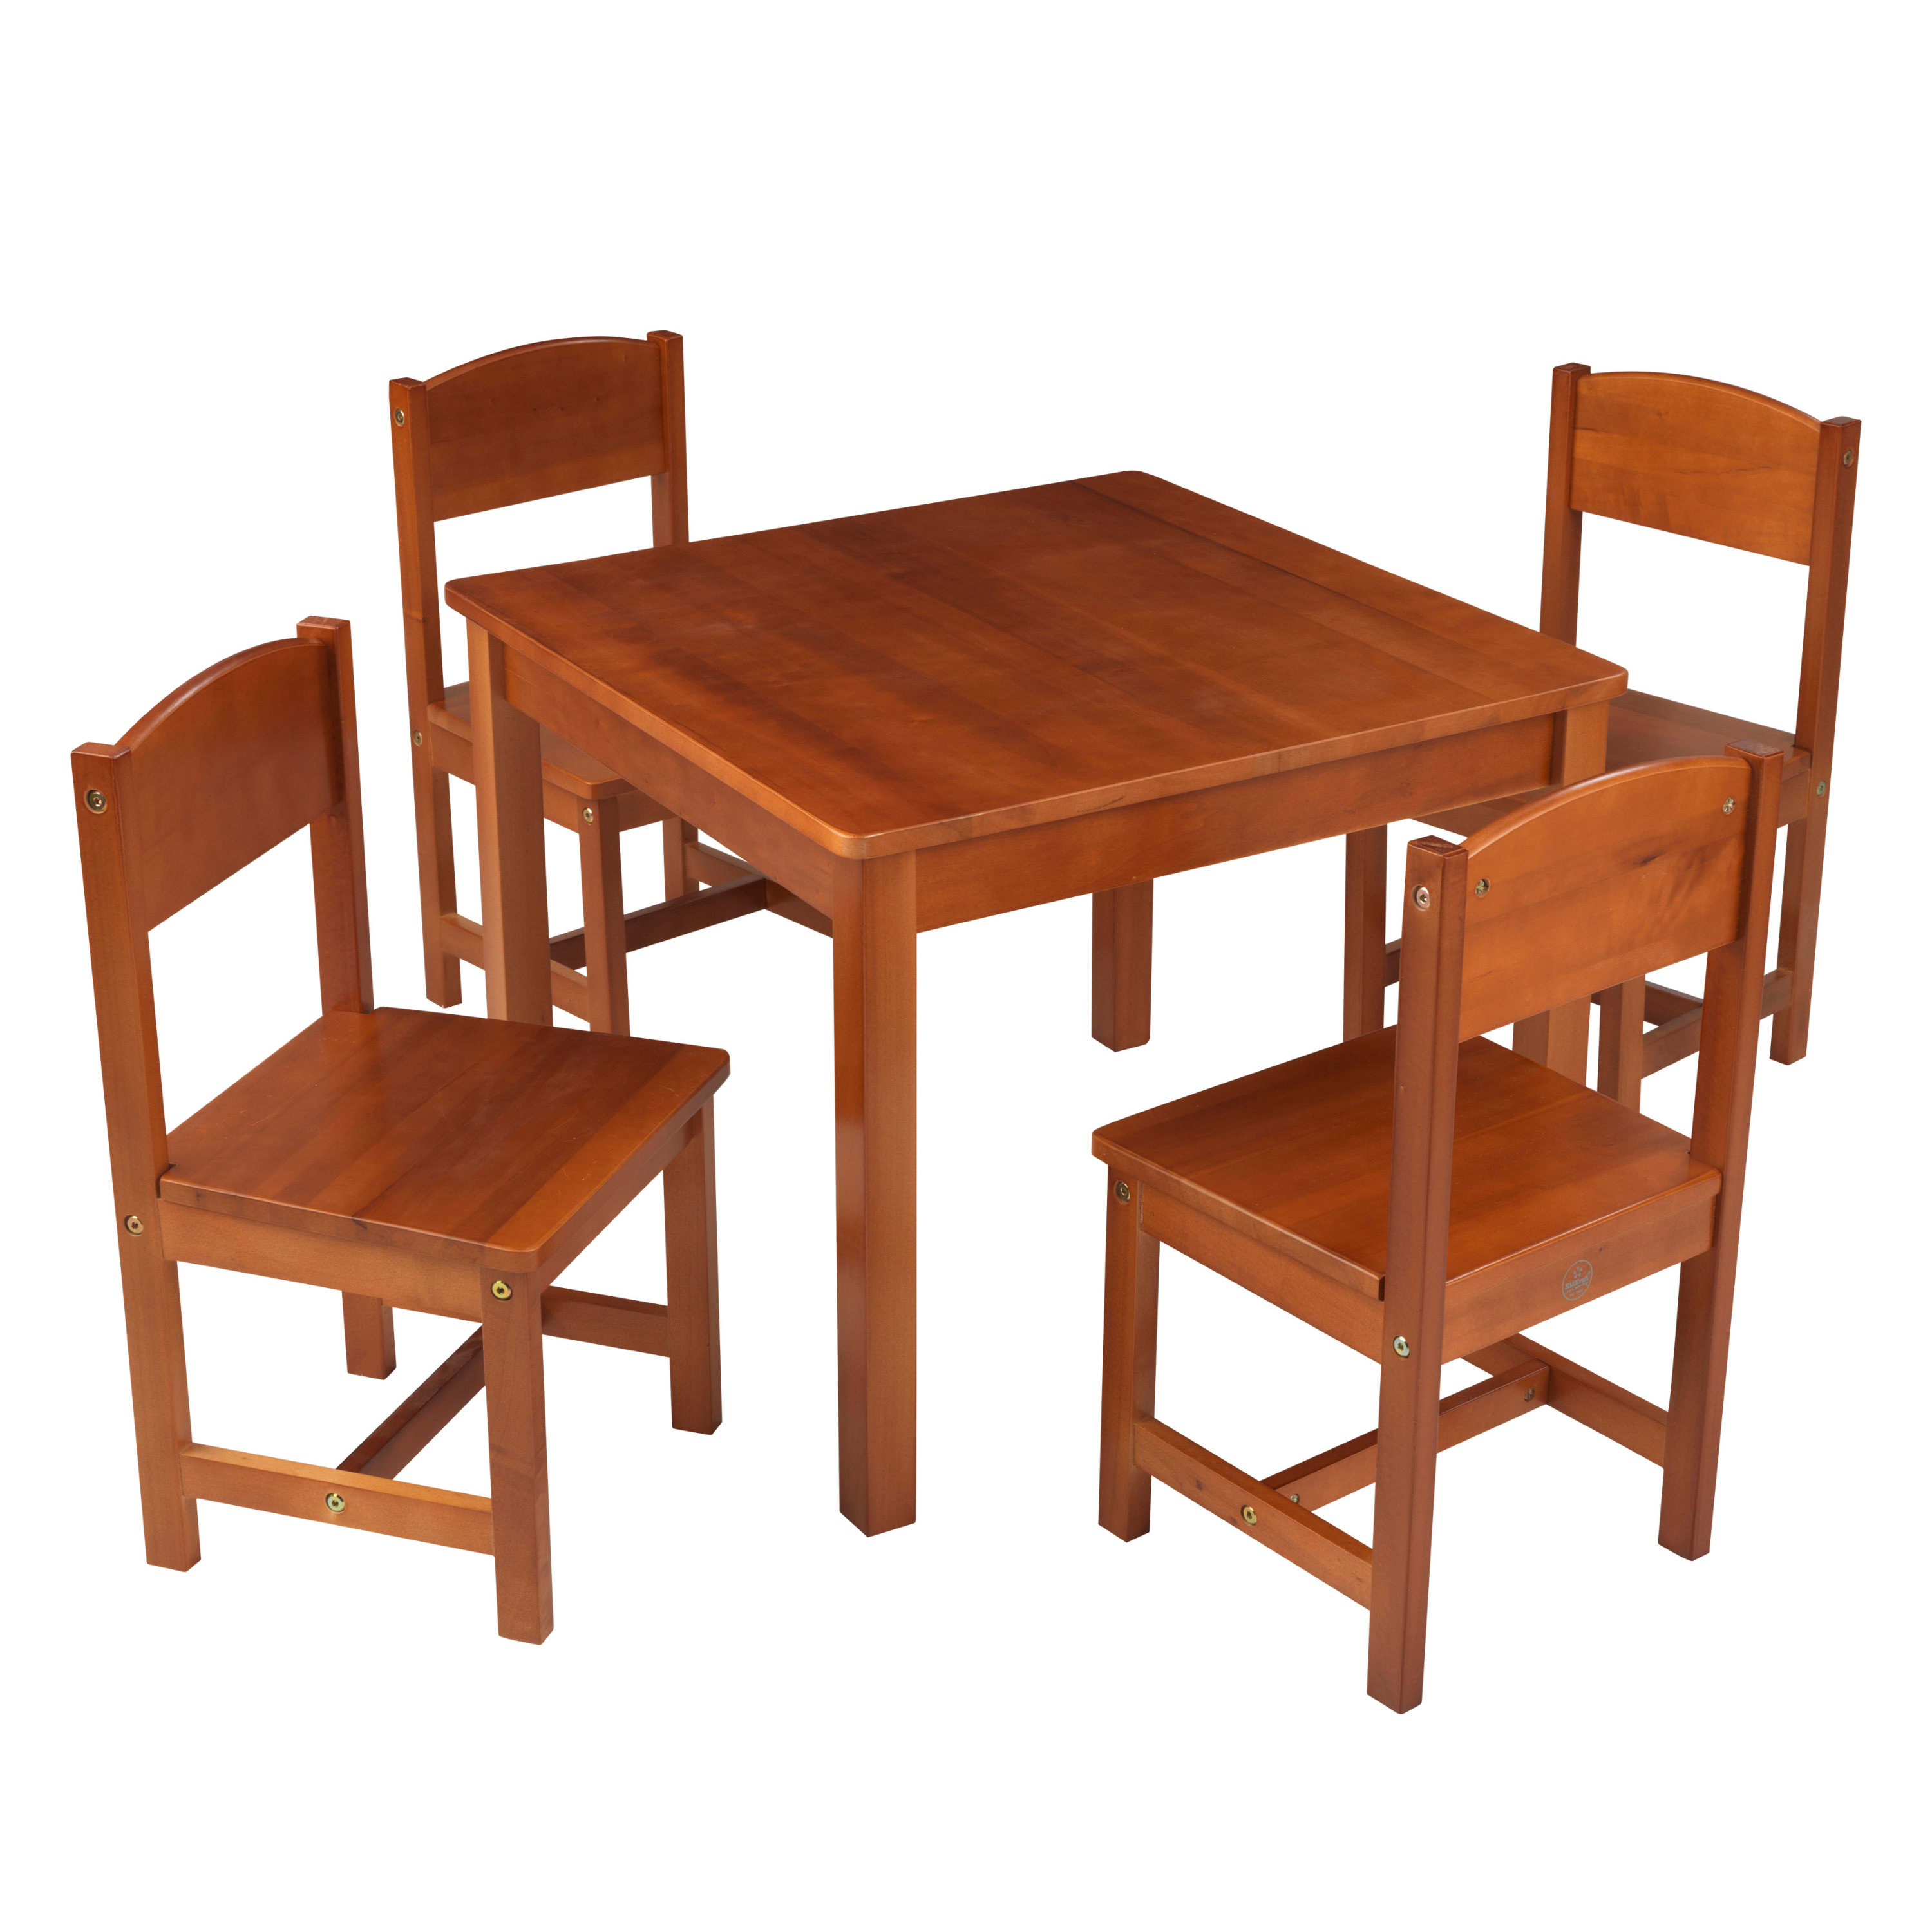 KidKraft KidKraft Wooden Farmhouse Table & 4 Chairs Set, Children's Furniture for Arts and Activity – Pecan - image 1 of 6